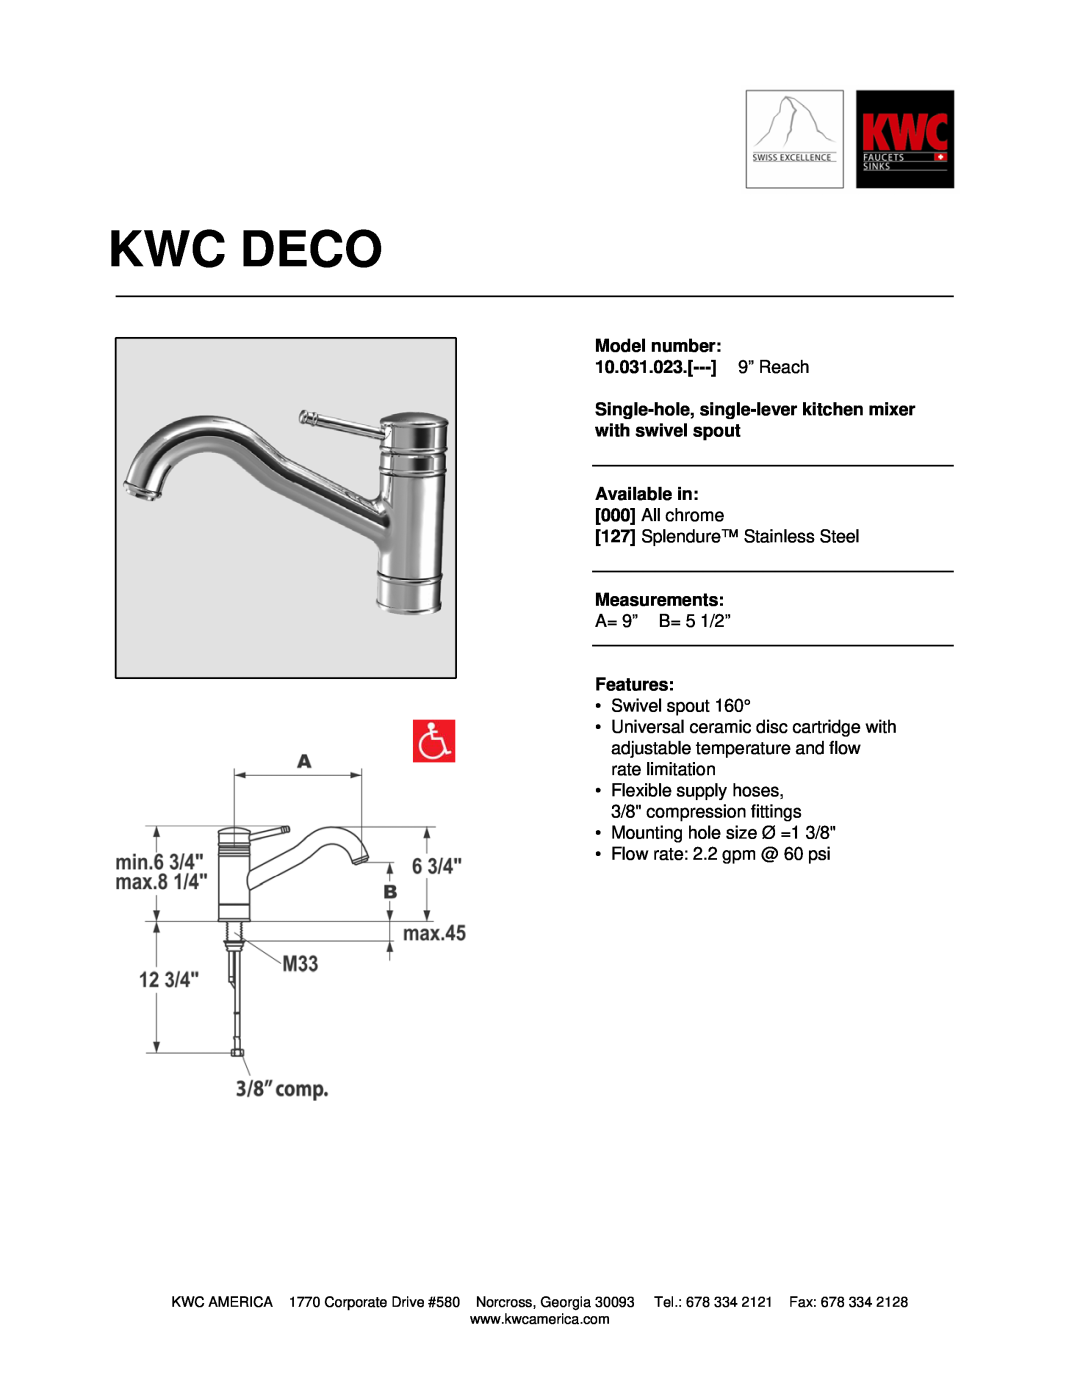 KWC manual Kwc Deco, Model number 10.031.023.--- 9” Reach, Available in, Measurements, Features 